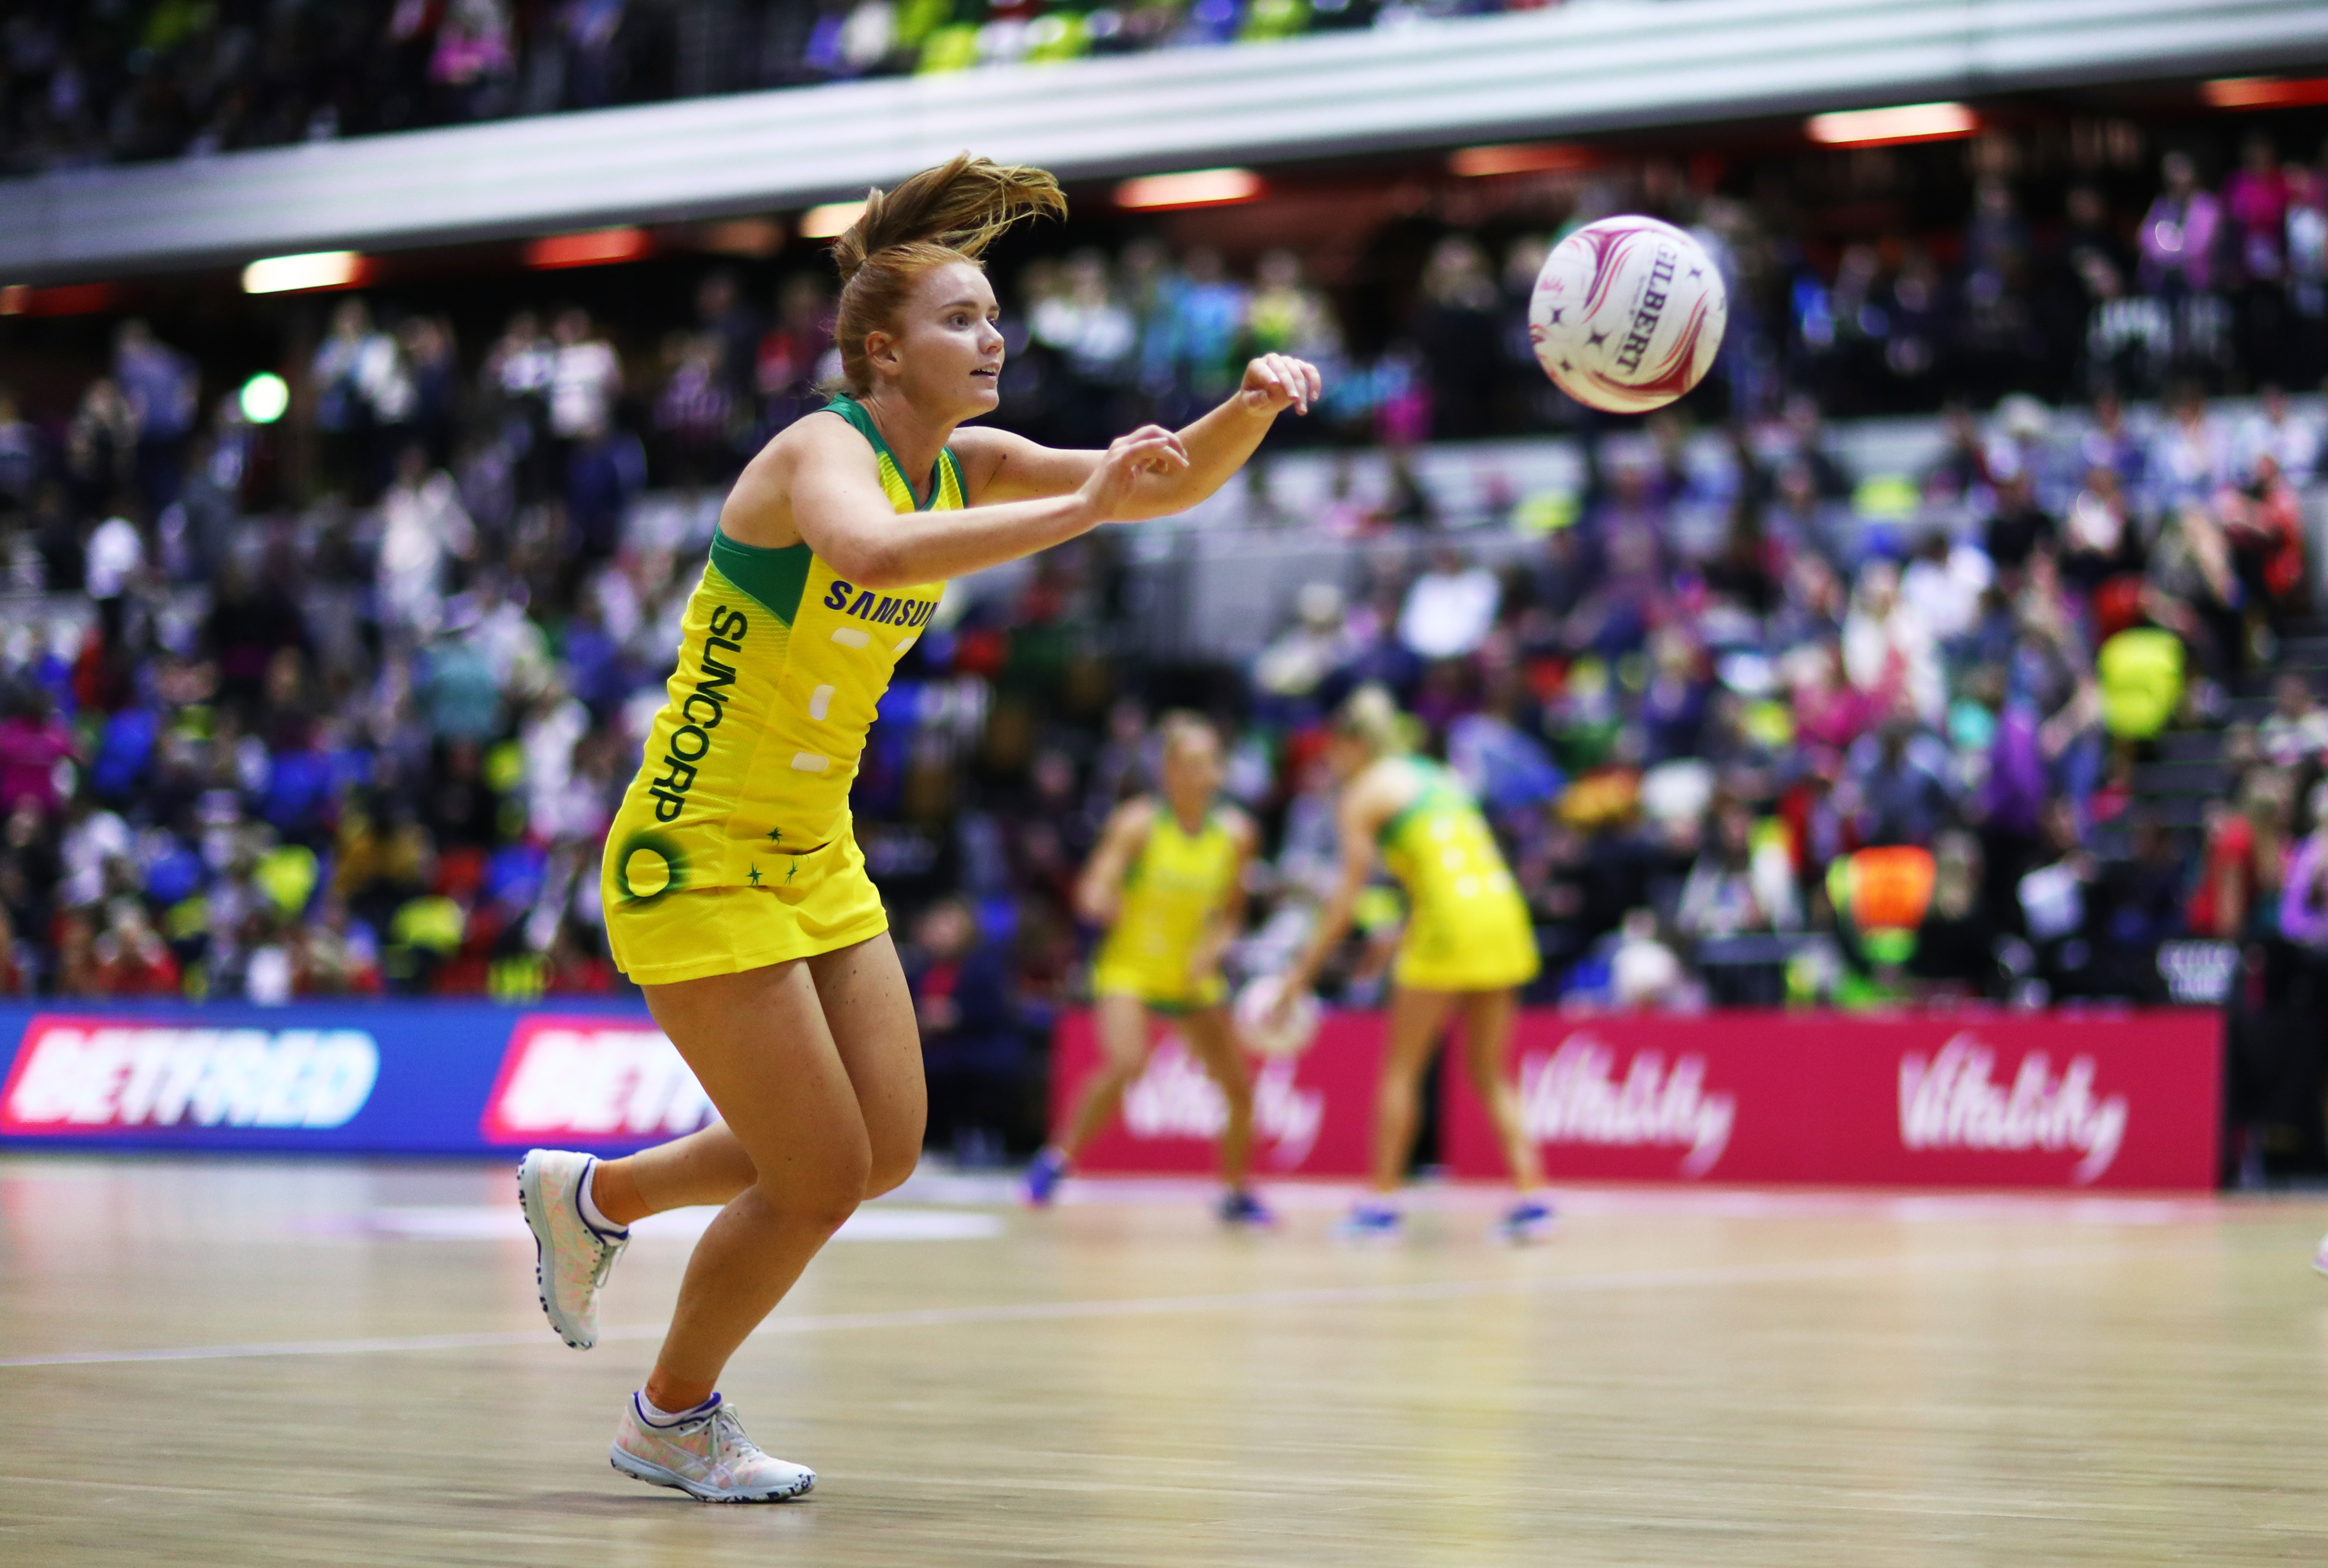 Stephanie Wood's recent retirement from international netball has been overshadowed by the ugly pay dispute between Netball Australia and the players' association.